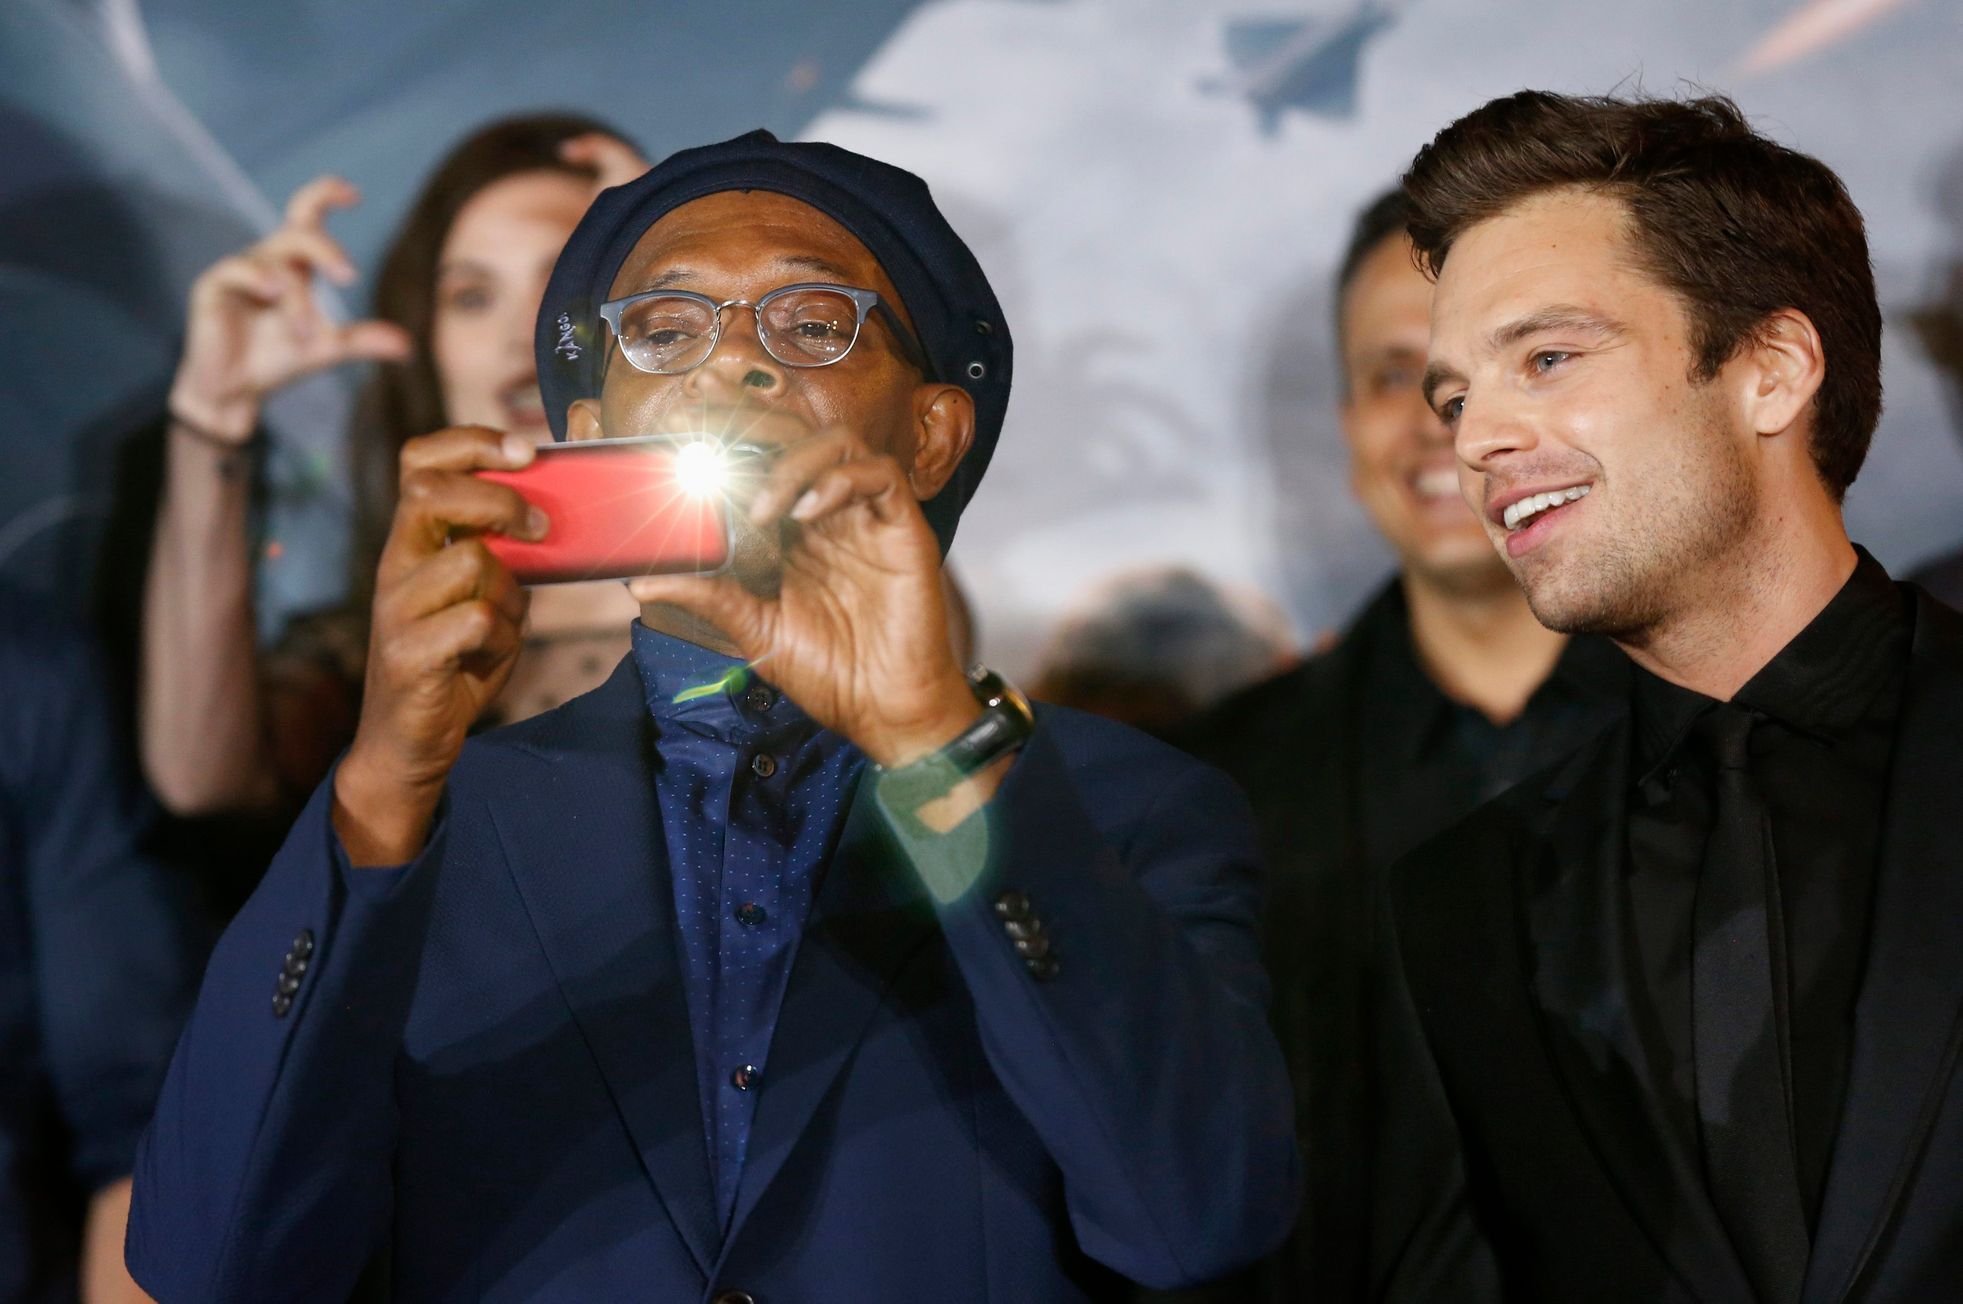 Cast member Jackson takes a photo with his mobile device next to co-star Stan at the premiere of &quot;Captain America: The Winter Soldier&quot; in Hollywood